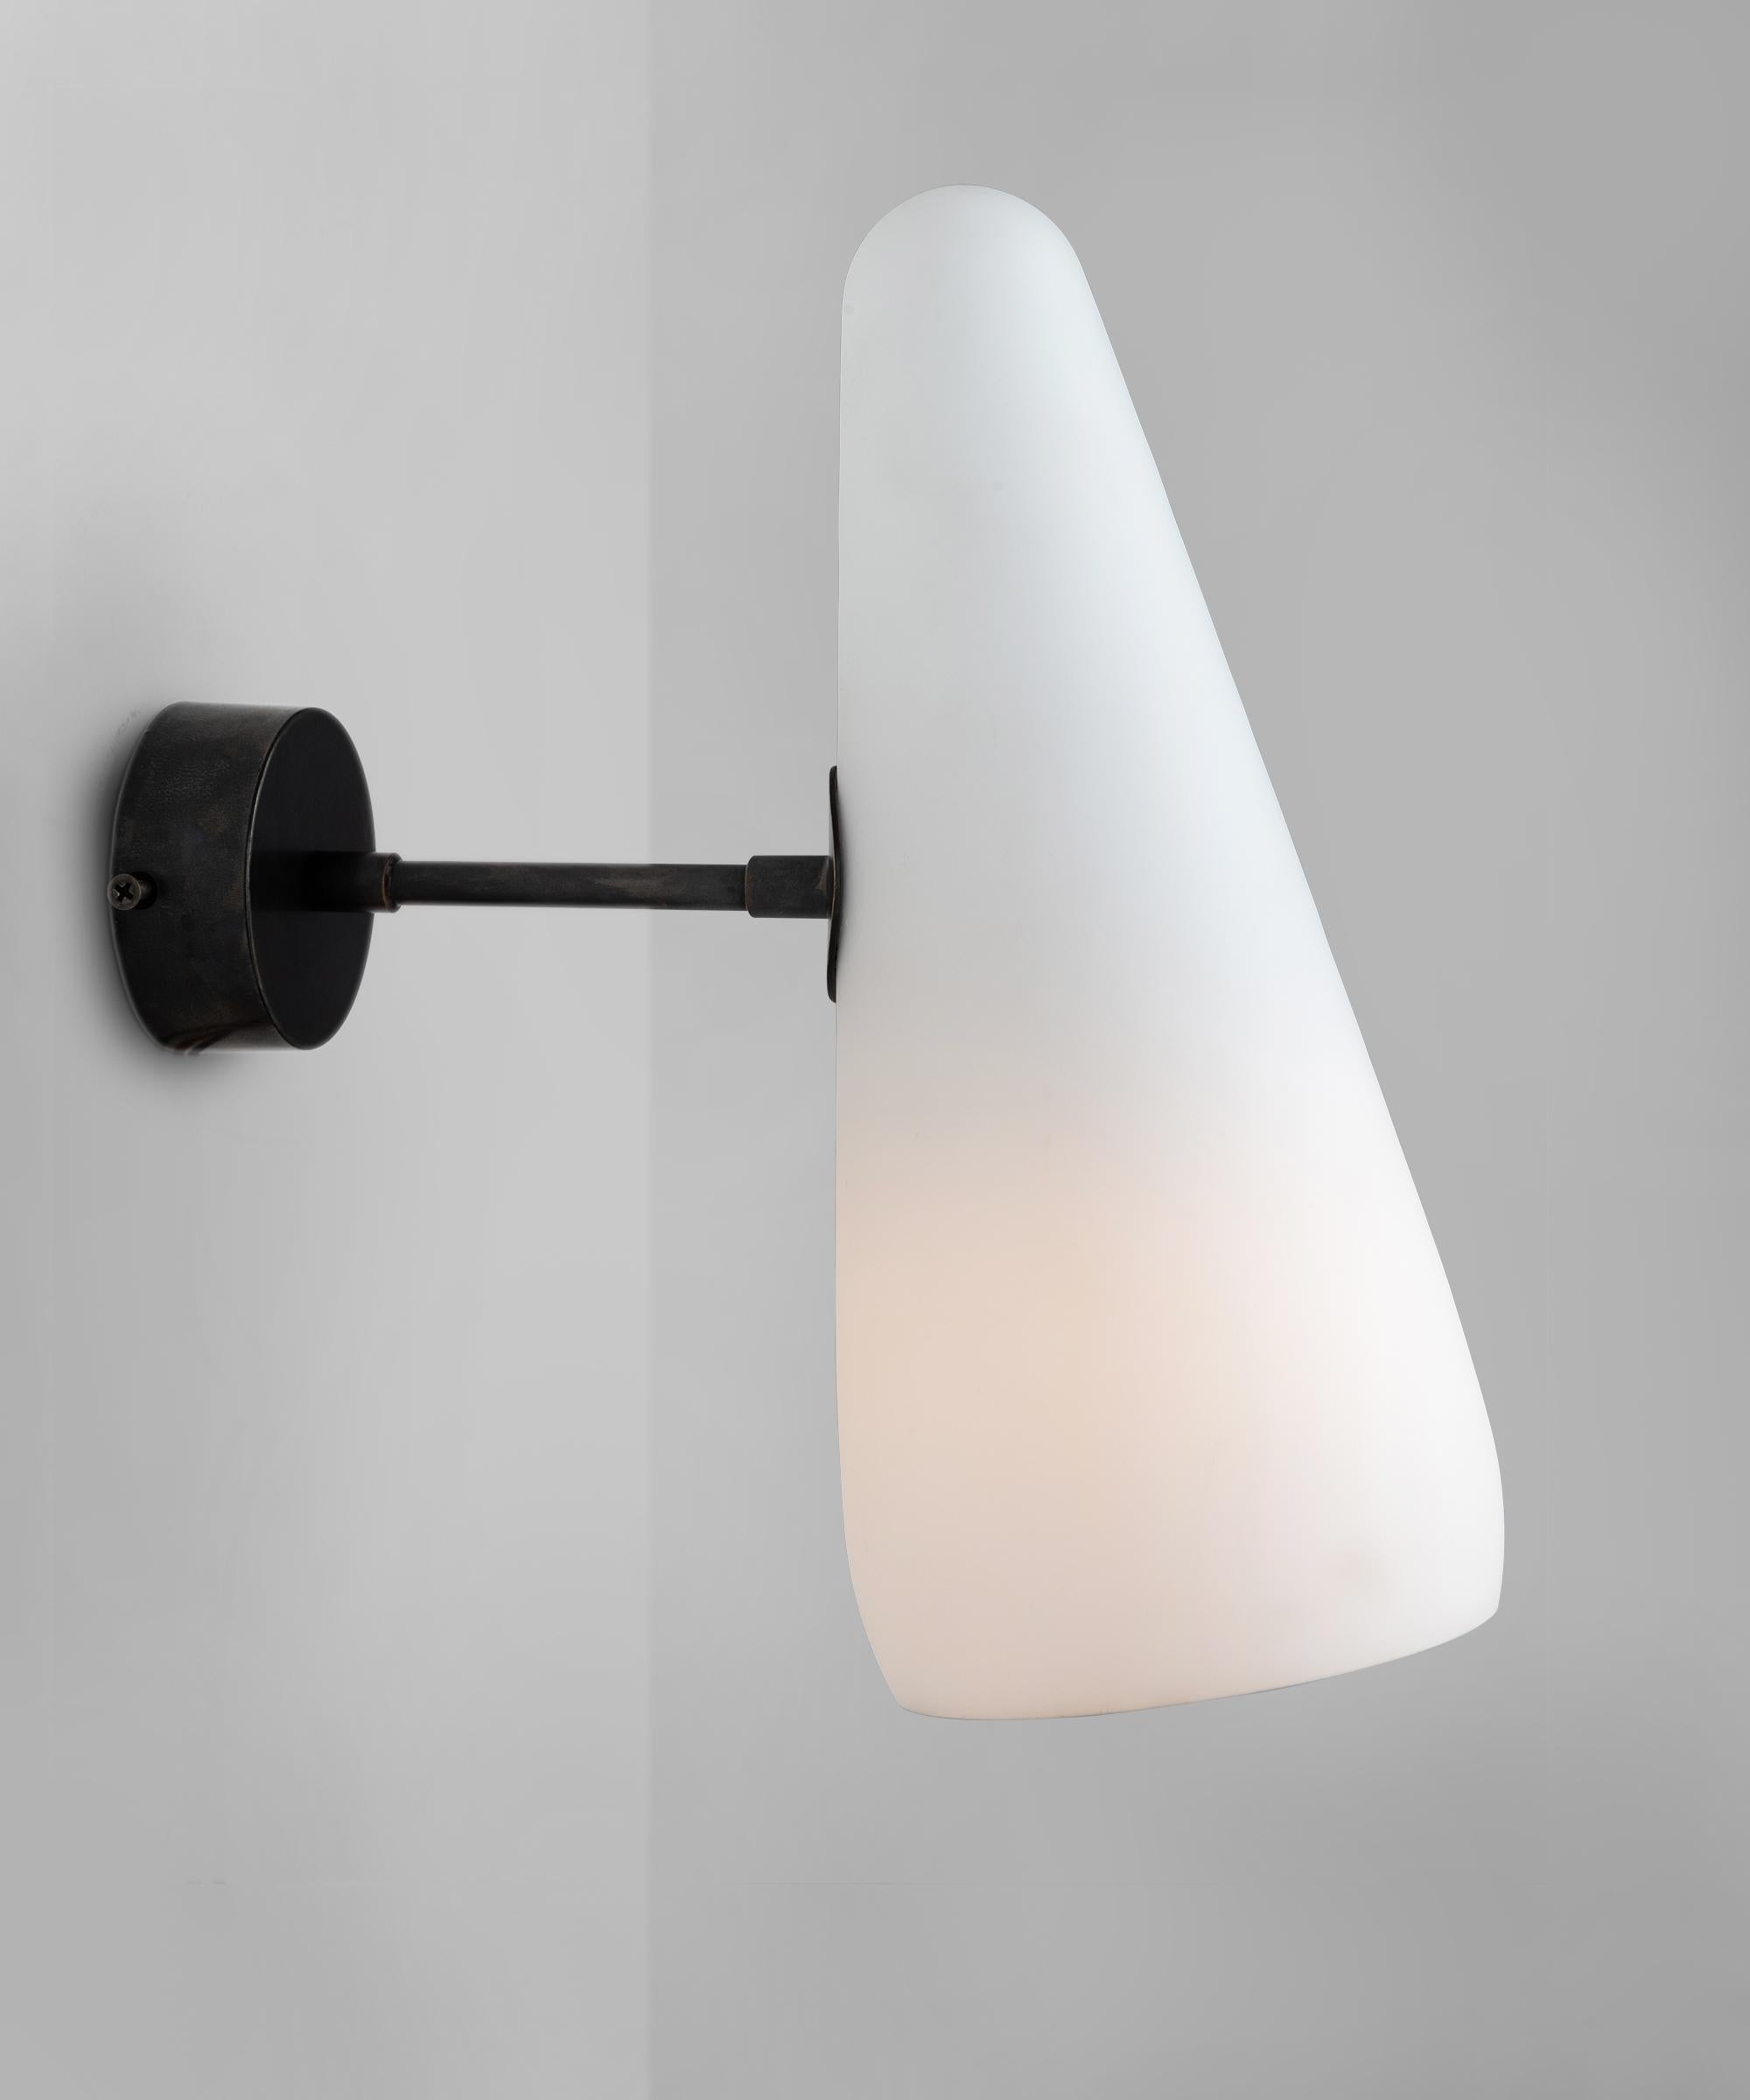 *Please note the price is per unit, and the lights are sold individually*

Opaline glass cone sconce

Made in Italy

Opaline glass shade with fixed brass arm and backplate.

Measures: 5